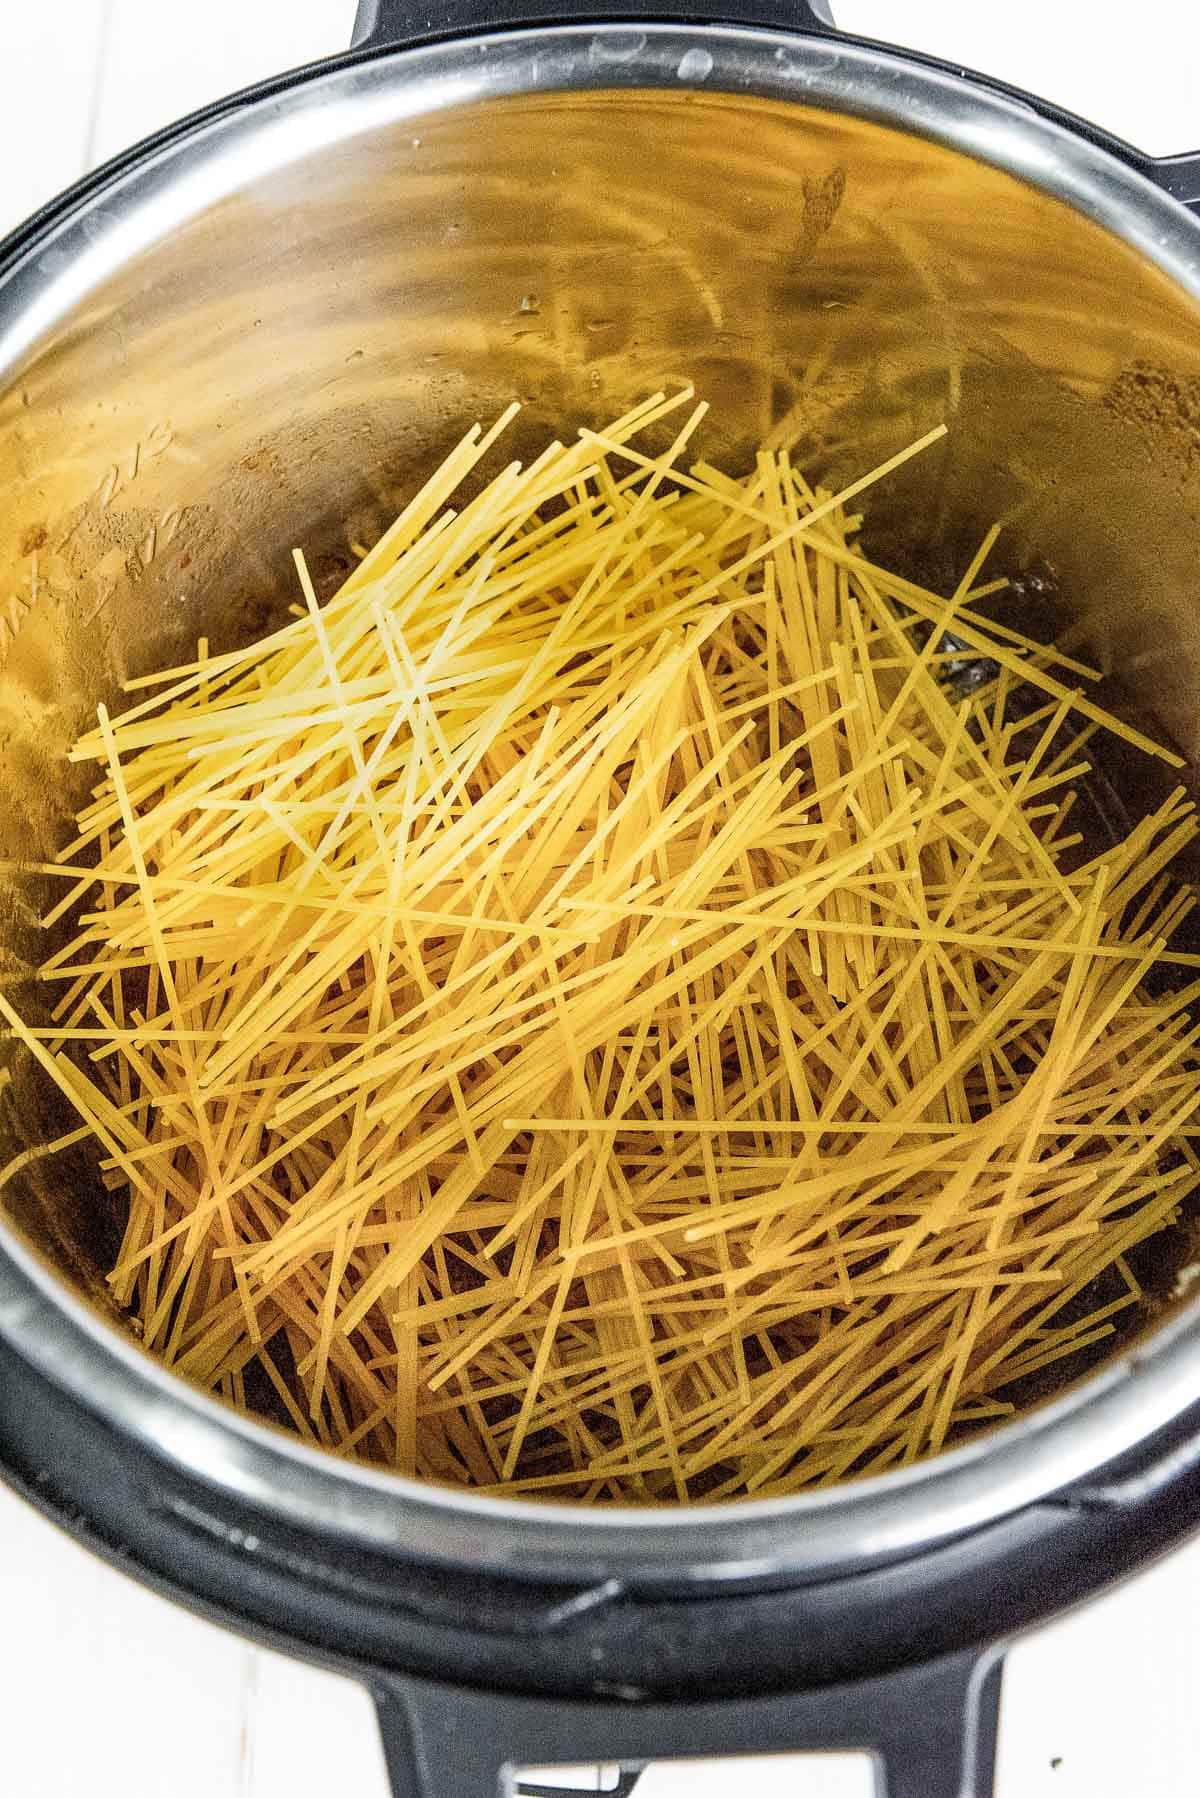 Spaghetti noodles inside an Instant Pot ready to be cooked.